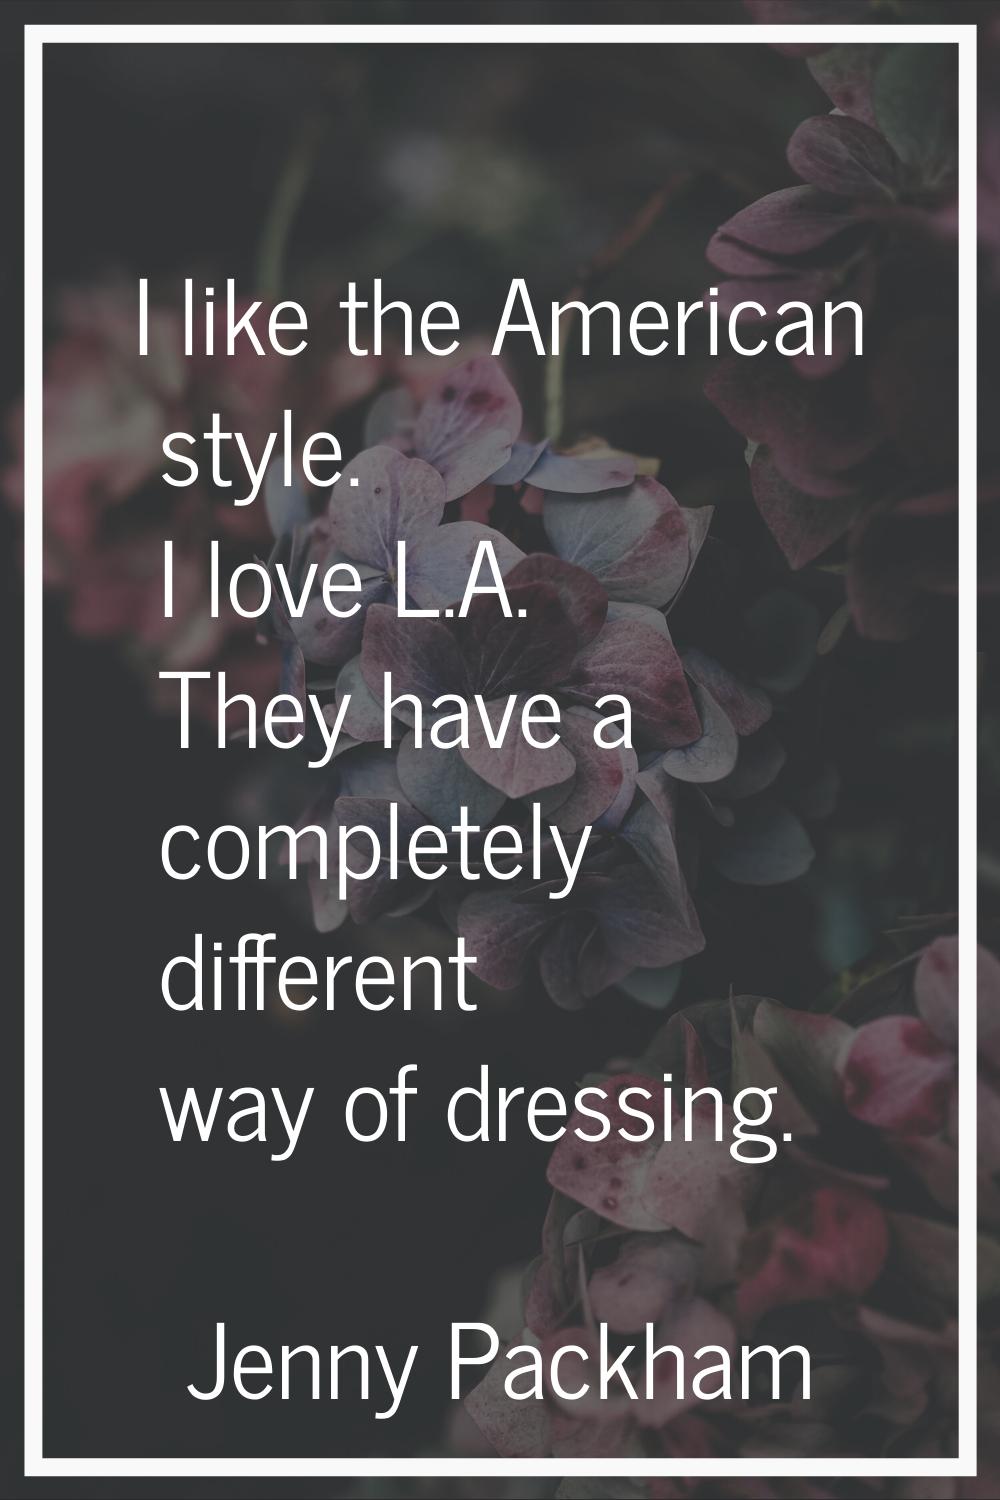 I like the American style. I love L.A. They have a completely different way of dressing.